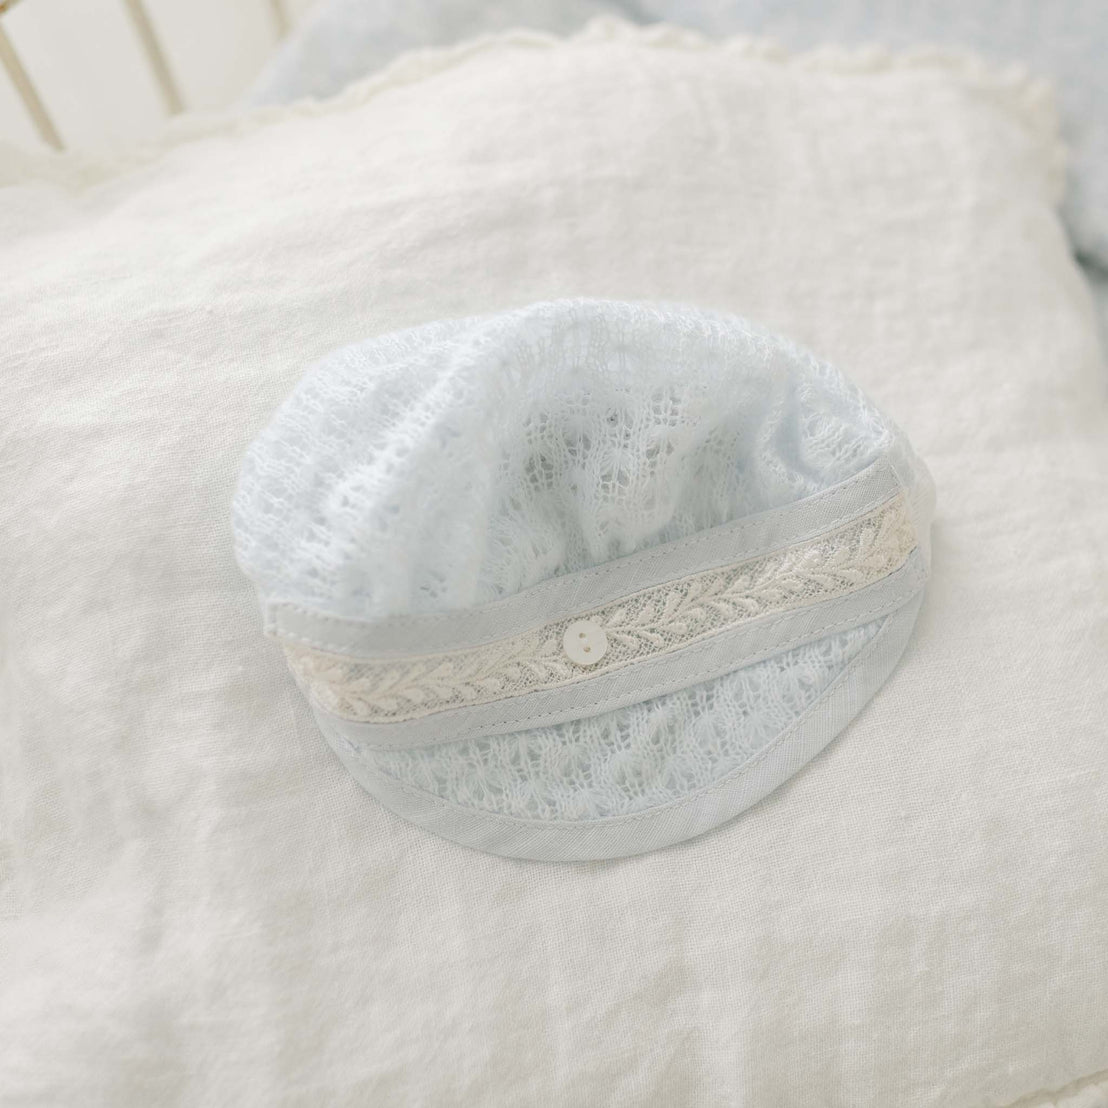 The Harrison Blue Knit Christening Hat, featuring a delicate, light blue knit with a decorative white band and a small white button, lies on a white, textured fabric surface. Its soft and intricate design suggests it is intended for an infant.